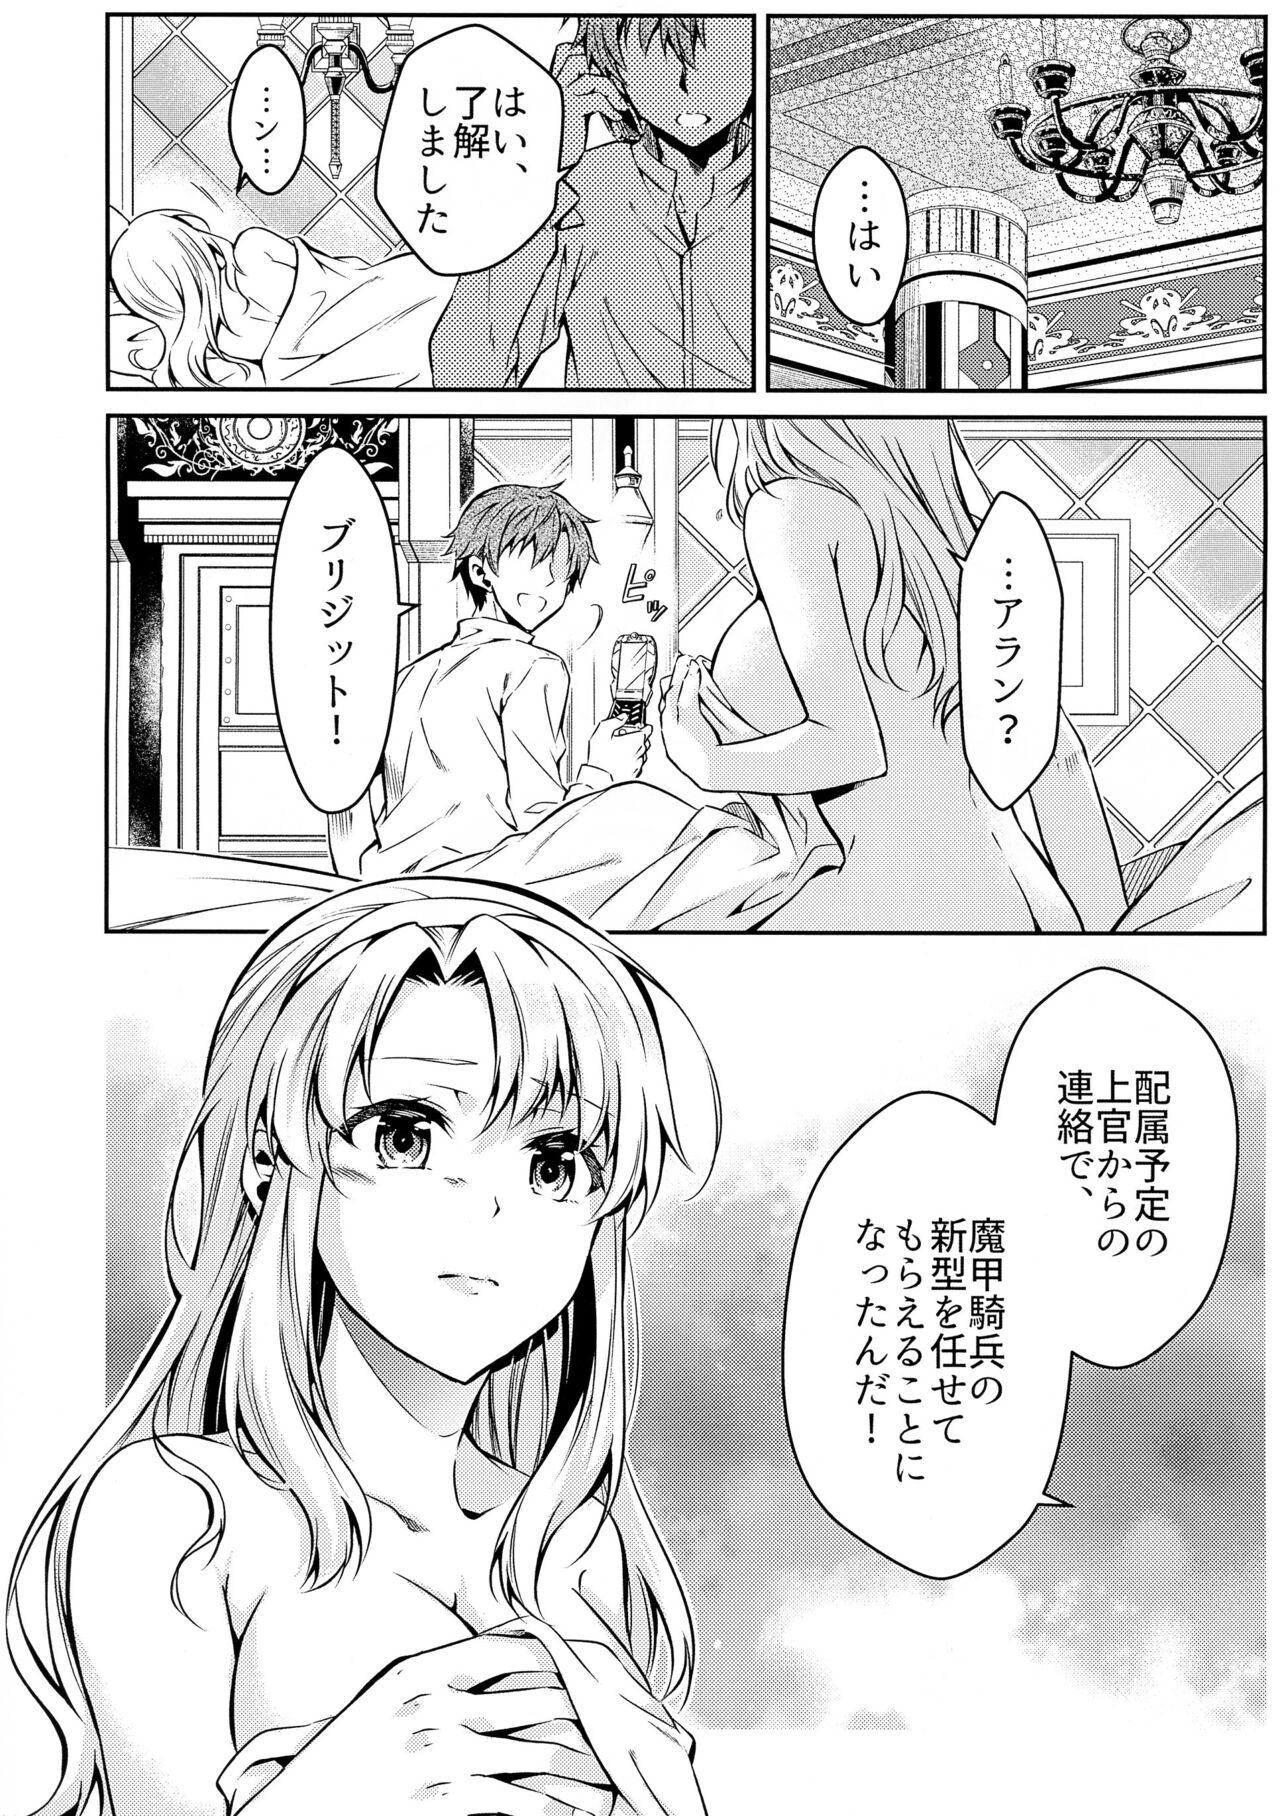 Virginity Affection & Blessing - The legend of heroes | eiyuu densetsu Lips - Page 5